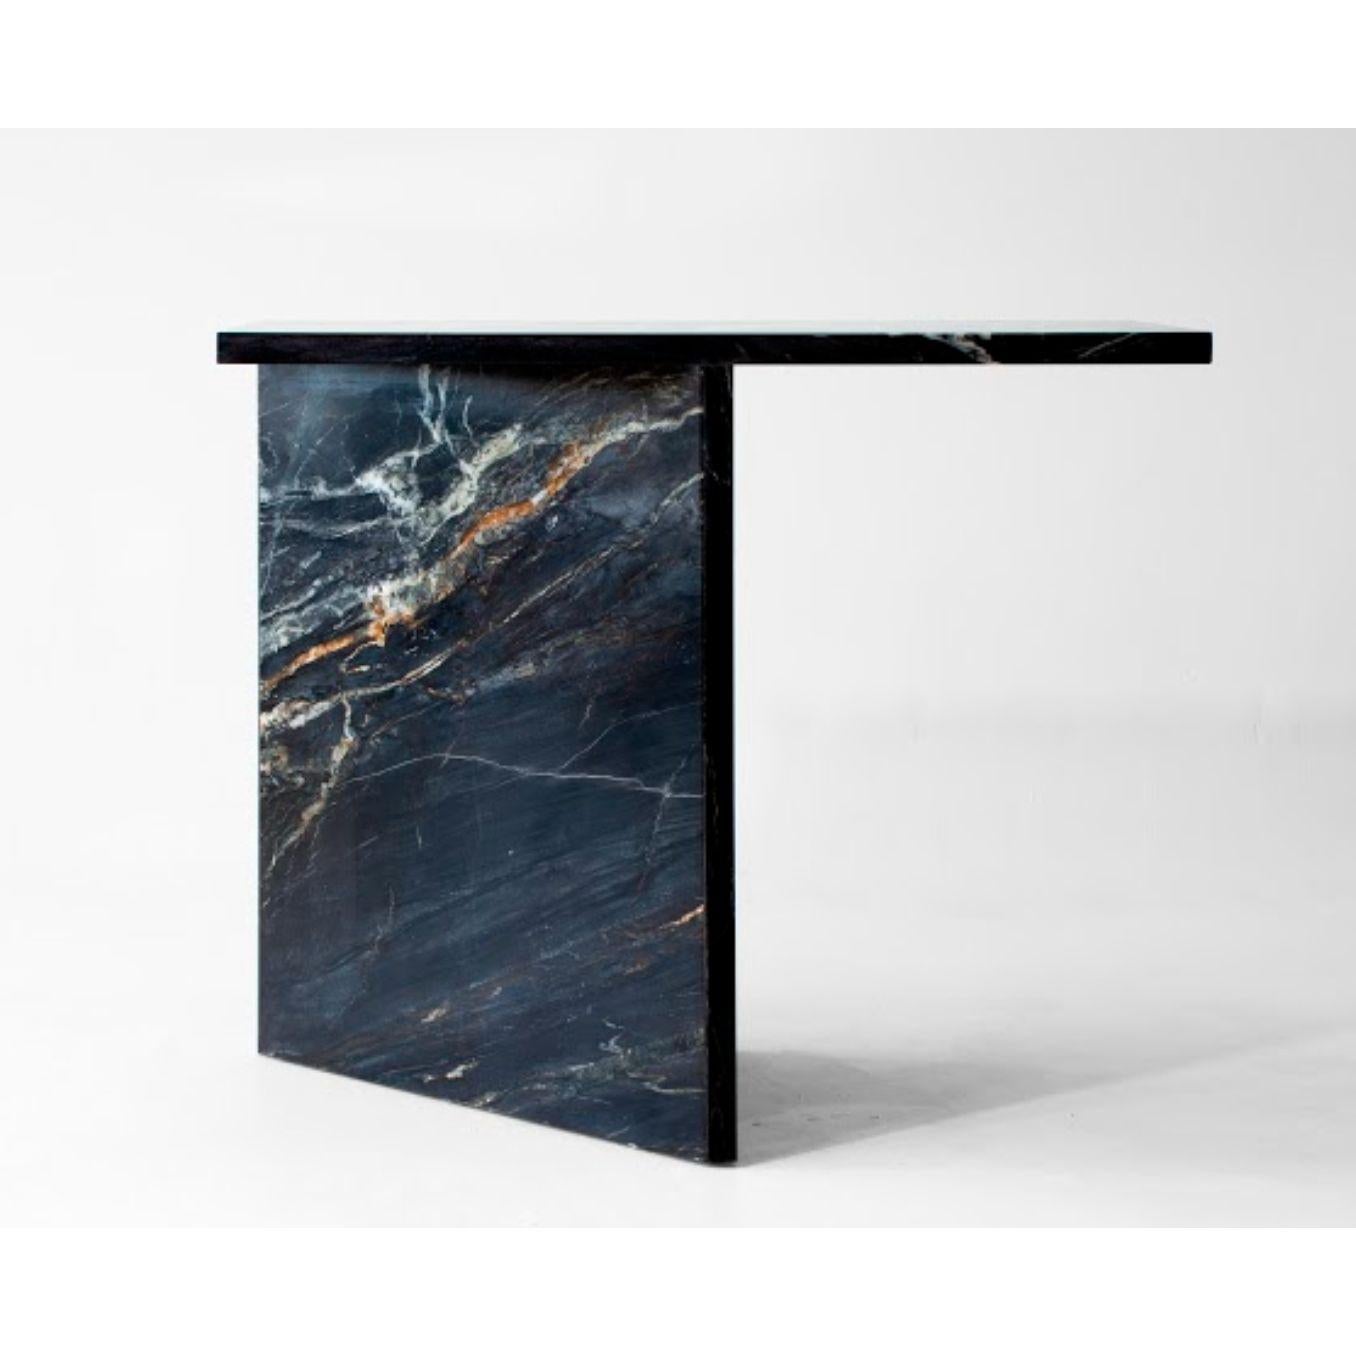 Postmoderne Table console And So I Stand par Claste en vente